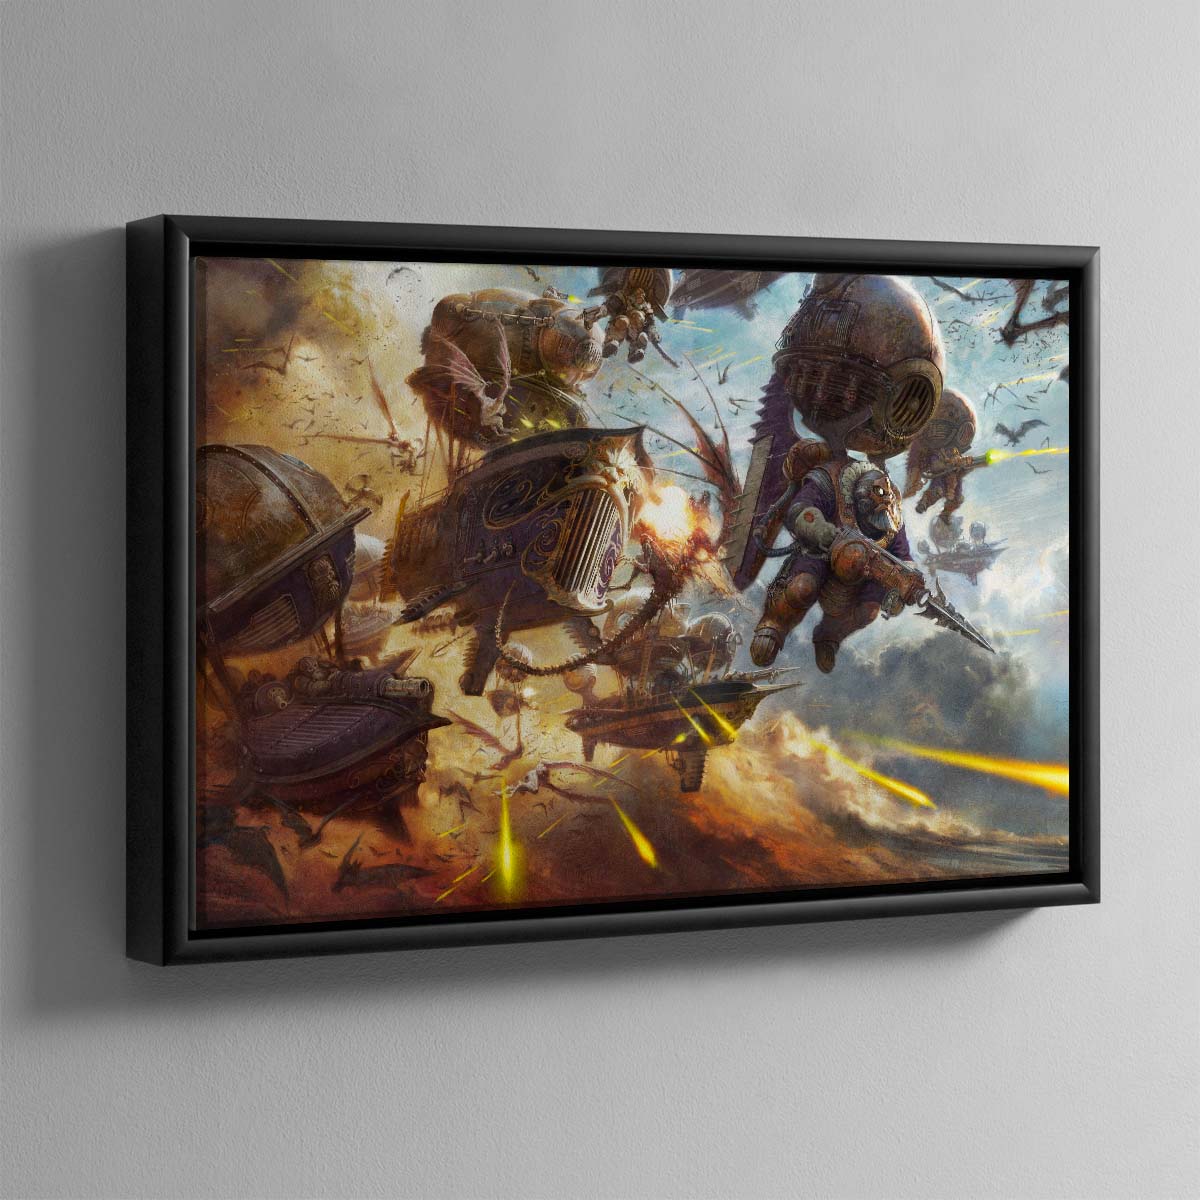 Kharadron Overlords vs Flesh-eater Courts – Framed Canvas